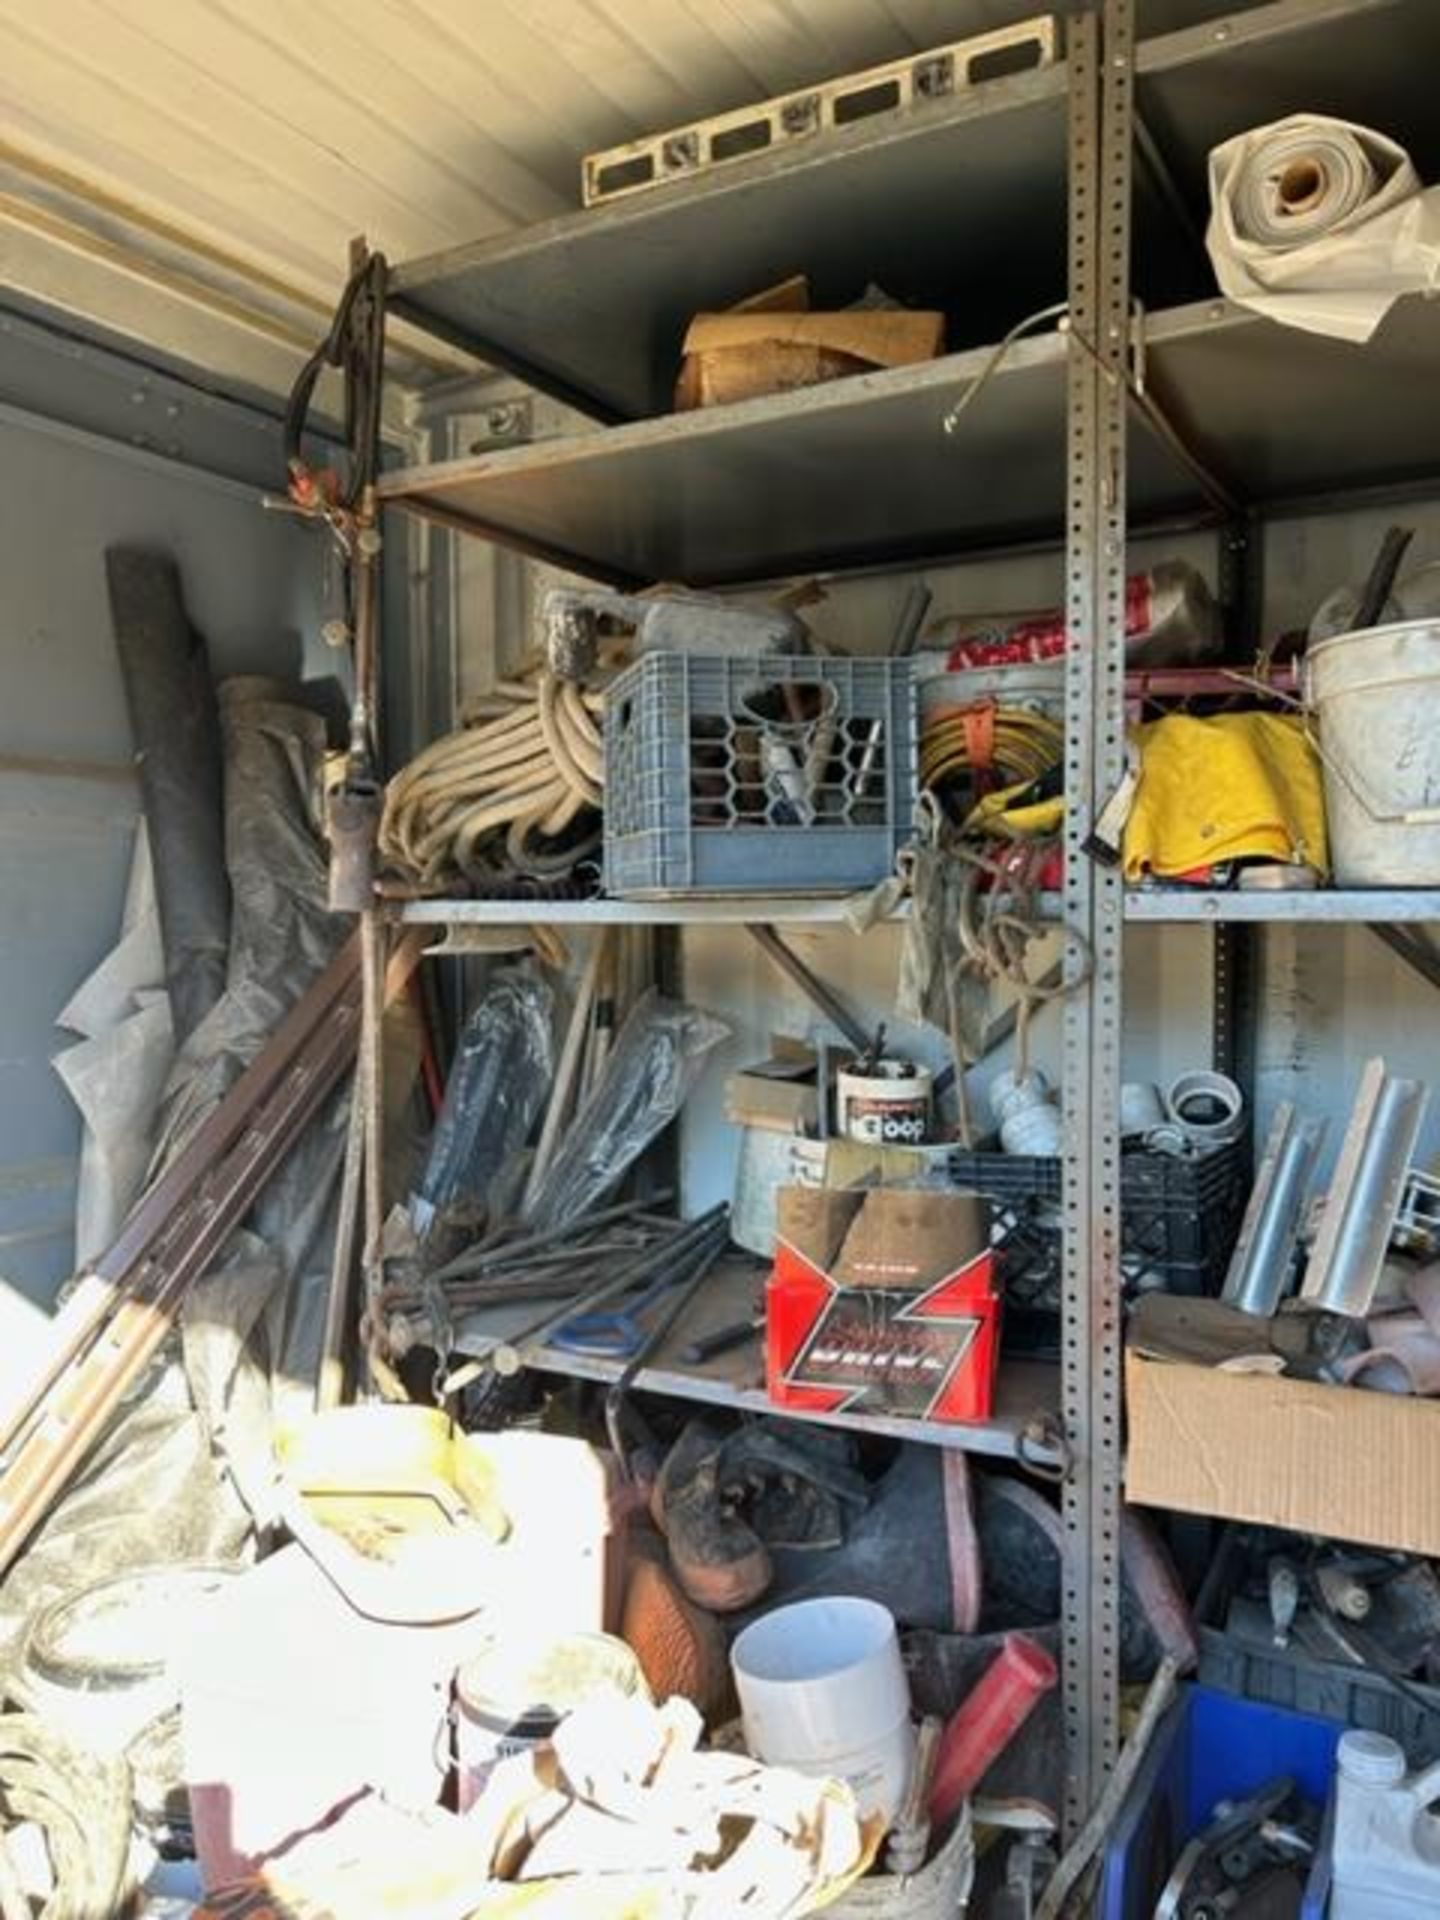 LOT - Contents of shed consisting of: Asphalt, Cement, Tools, Supplies, etc. - Image 4 of 7